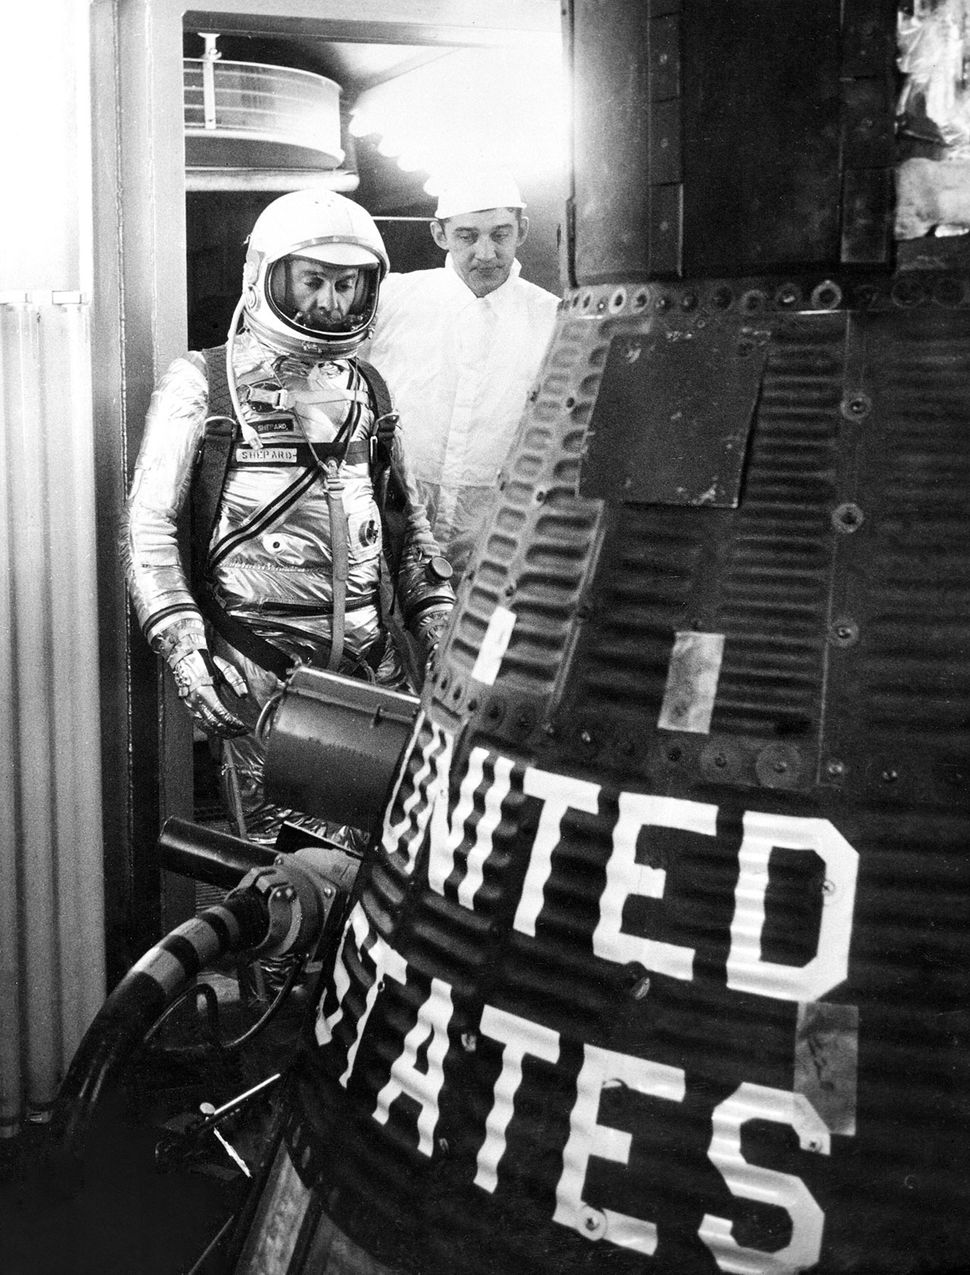 Smithsonian inspects first US astronaut's space capsule, suit 60 years on | Space